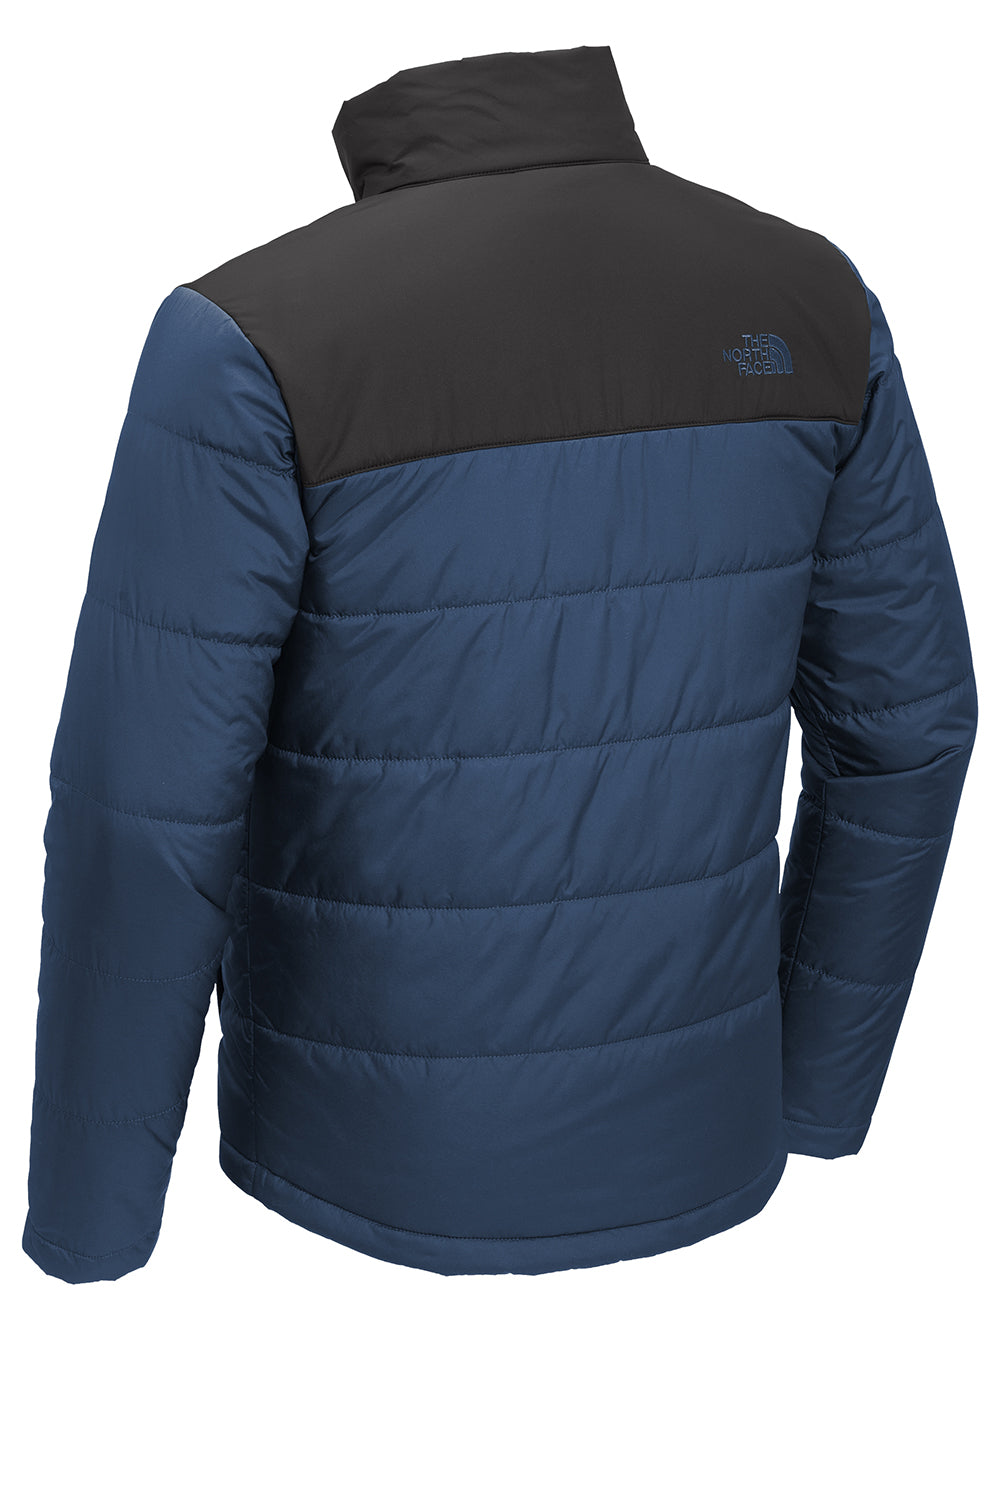 The North Face NF0A7V6J Mens Everyday Insulated Full Zip Jacket Shady Blue Flat Back